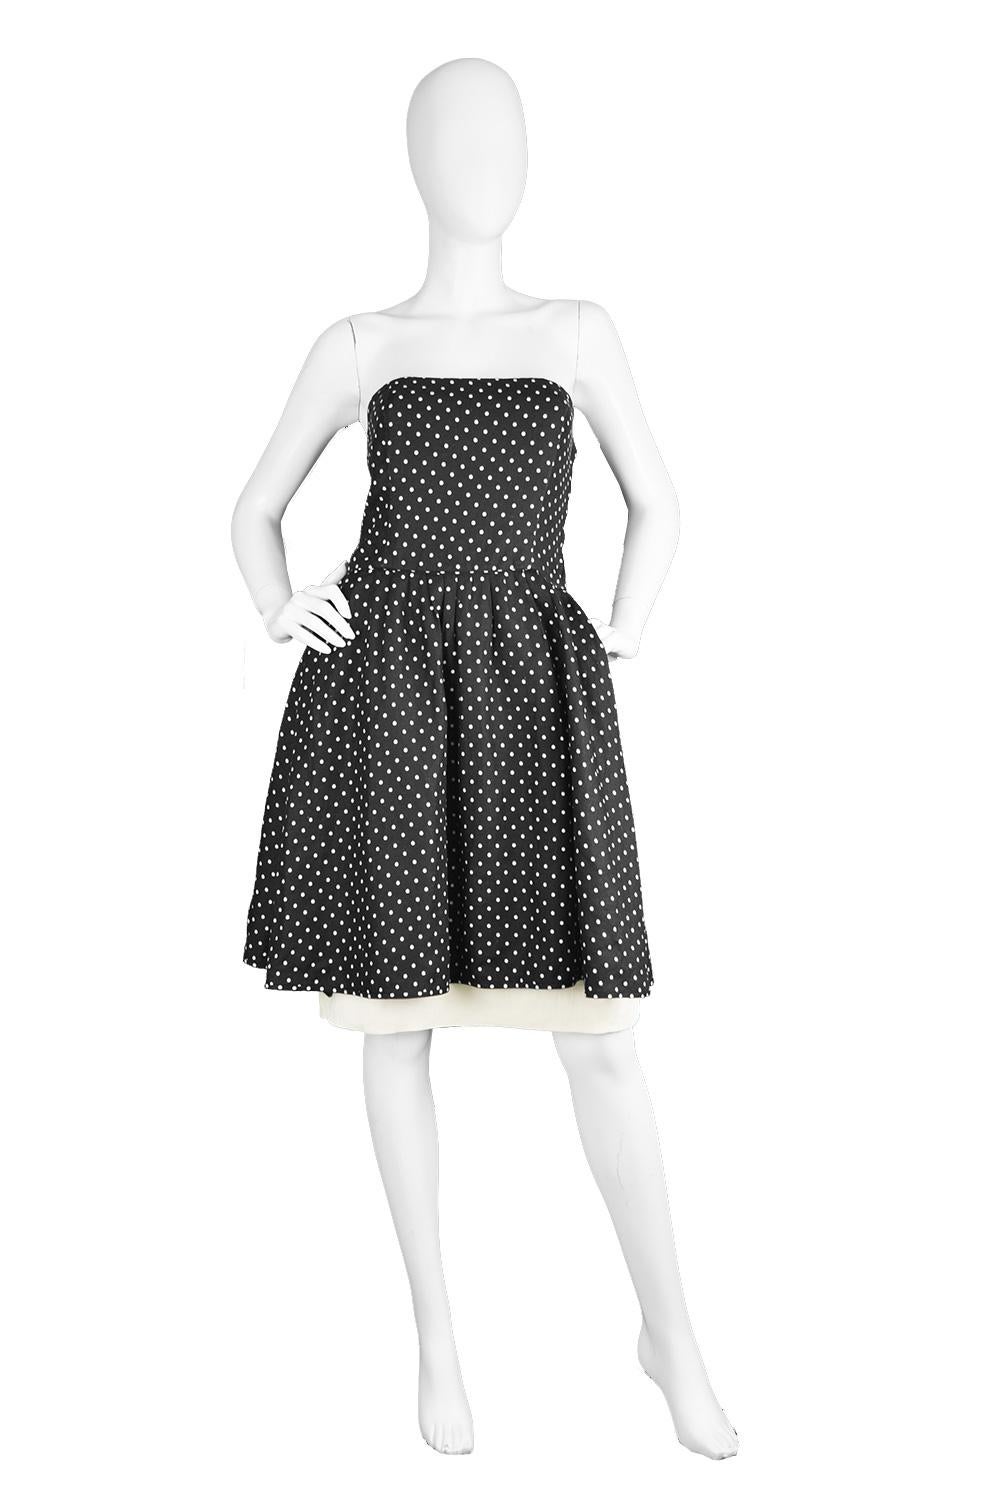  A Valentino Night vintage black and cream polka dot linen flared dress from the 1980s with a strapless design and tiered skirt. 

Click 'Continue Reading' below to see size & description. 

Estimated Size: UK 6-8/ US 2-4/ EU 34-36. Please check